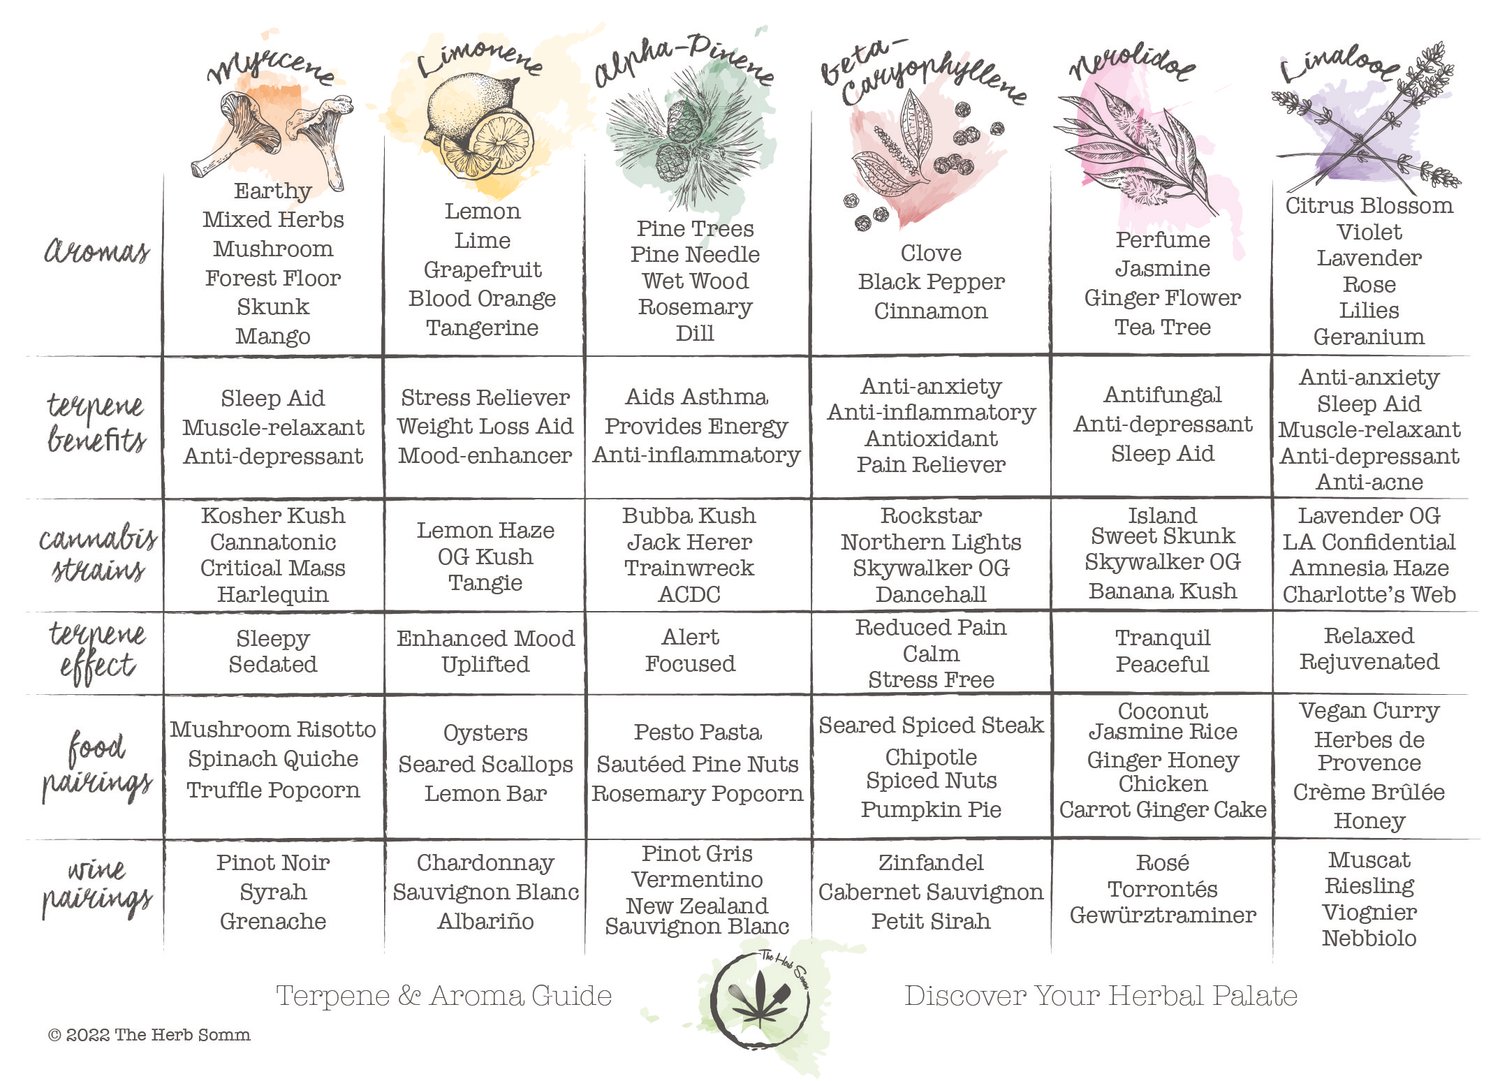 Jamie Evans created a pairing guide to help people “discover the magical world of terpenes.”